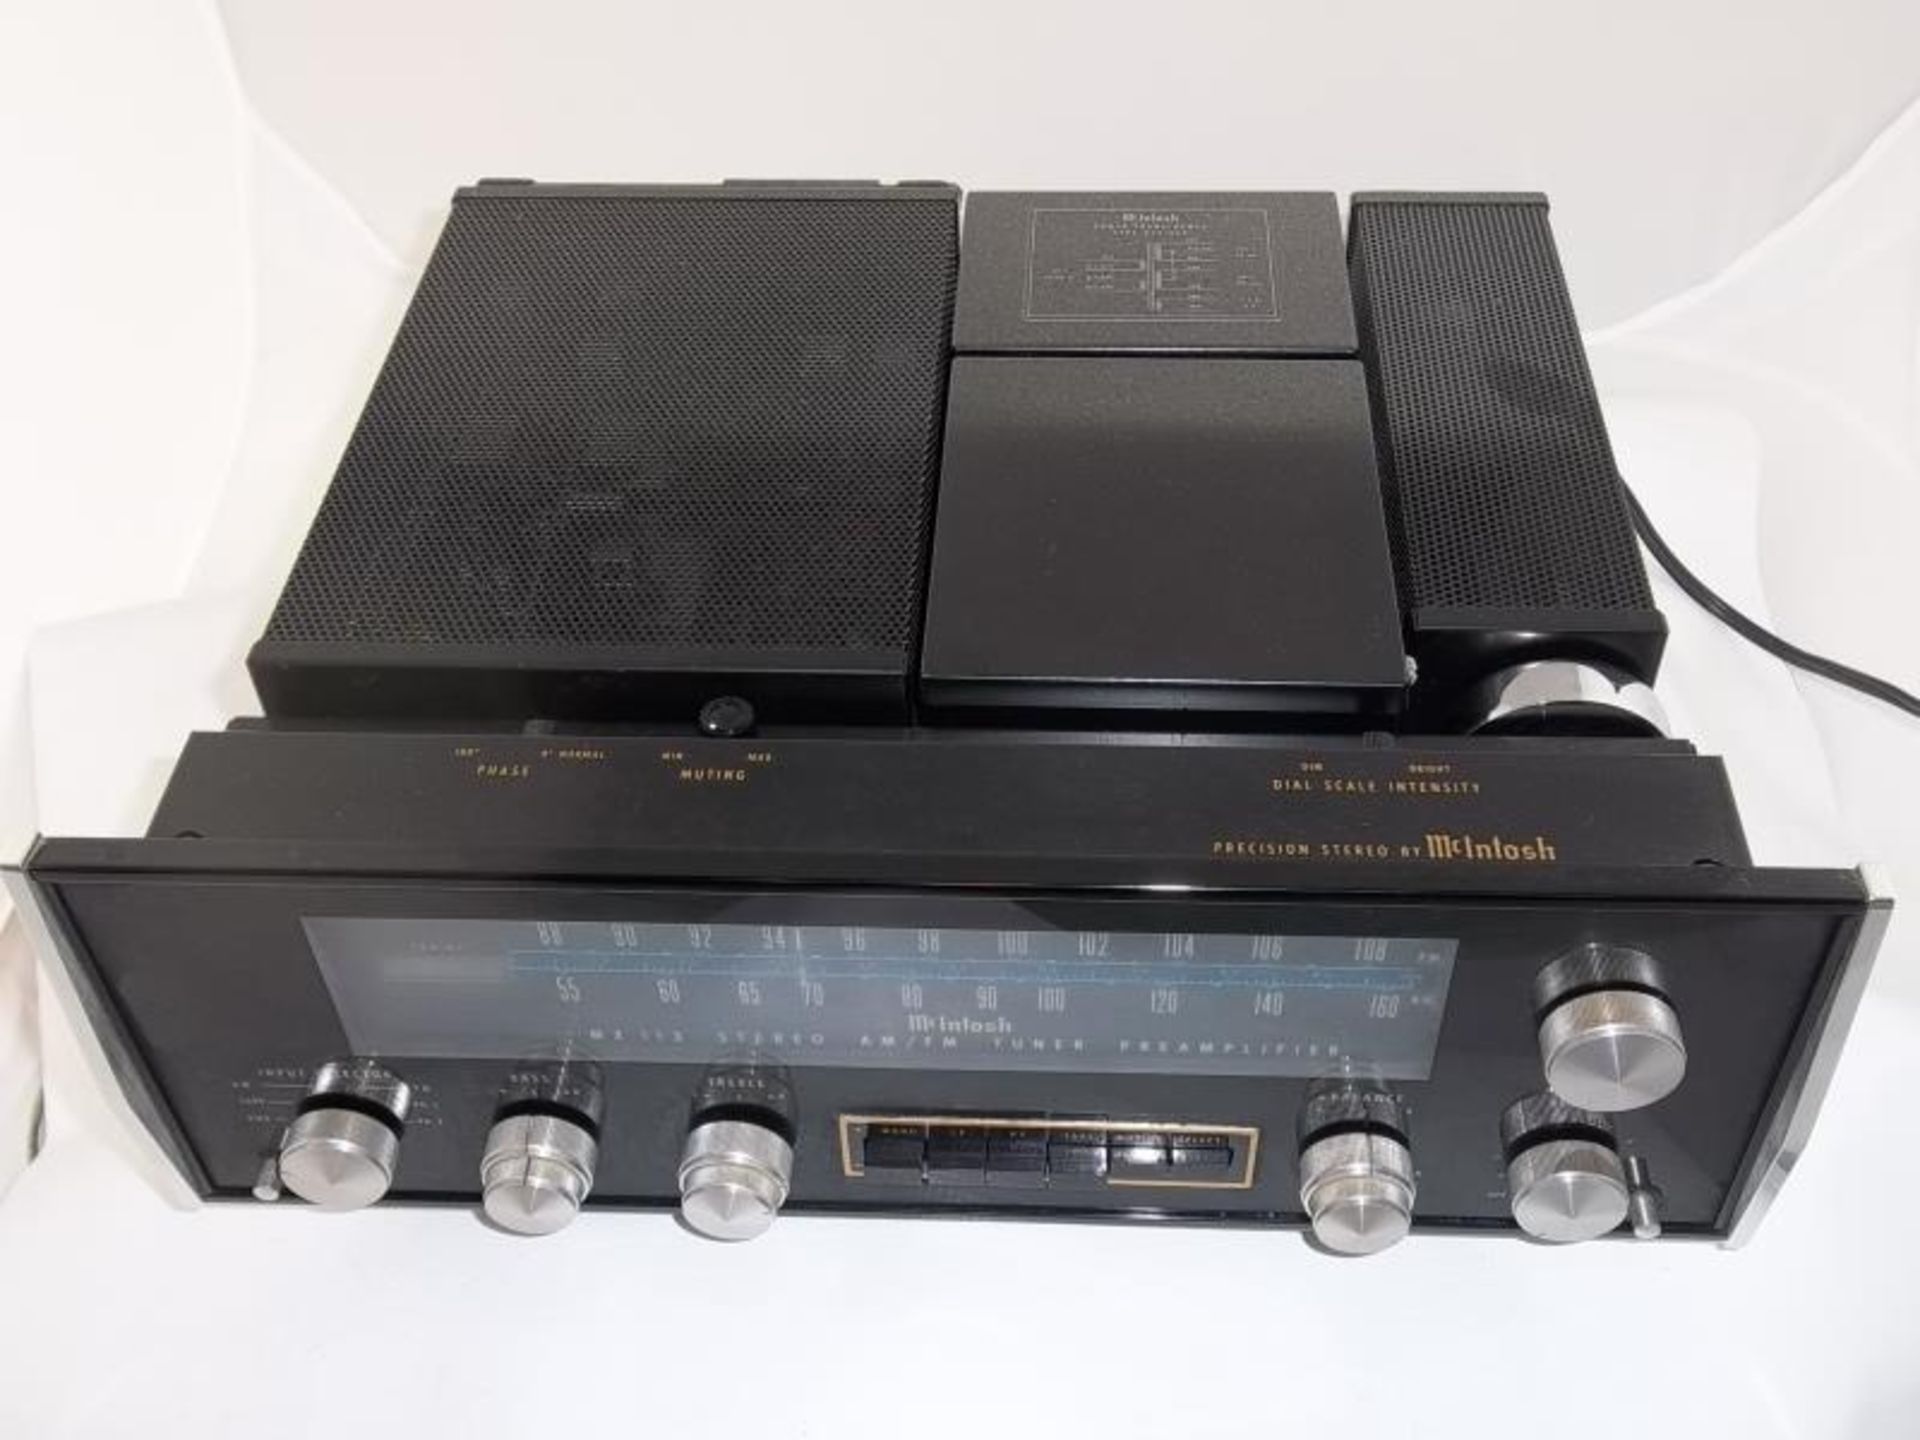 McIntosh MX 113, Stereo AM/FM Tuner, Pre Amp, w/ case, s # 303H1, tested - powers up - Image 3 of 4